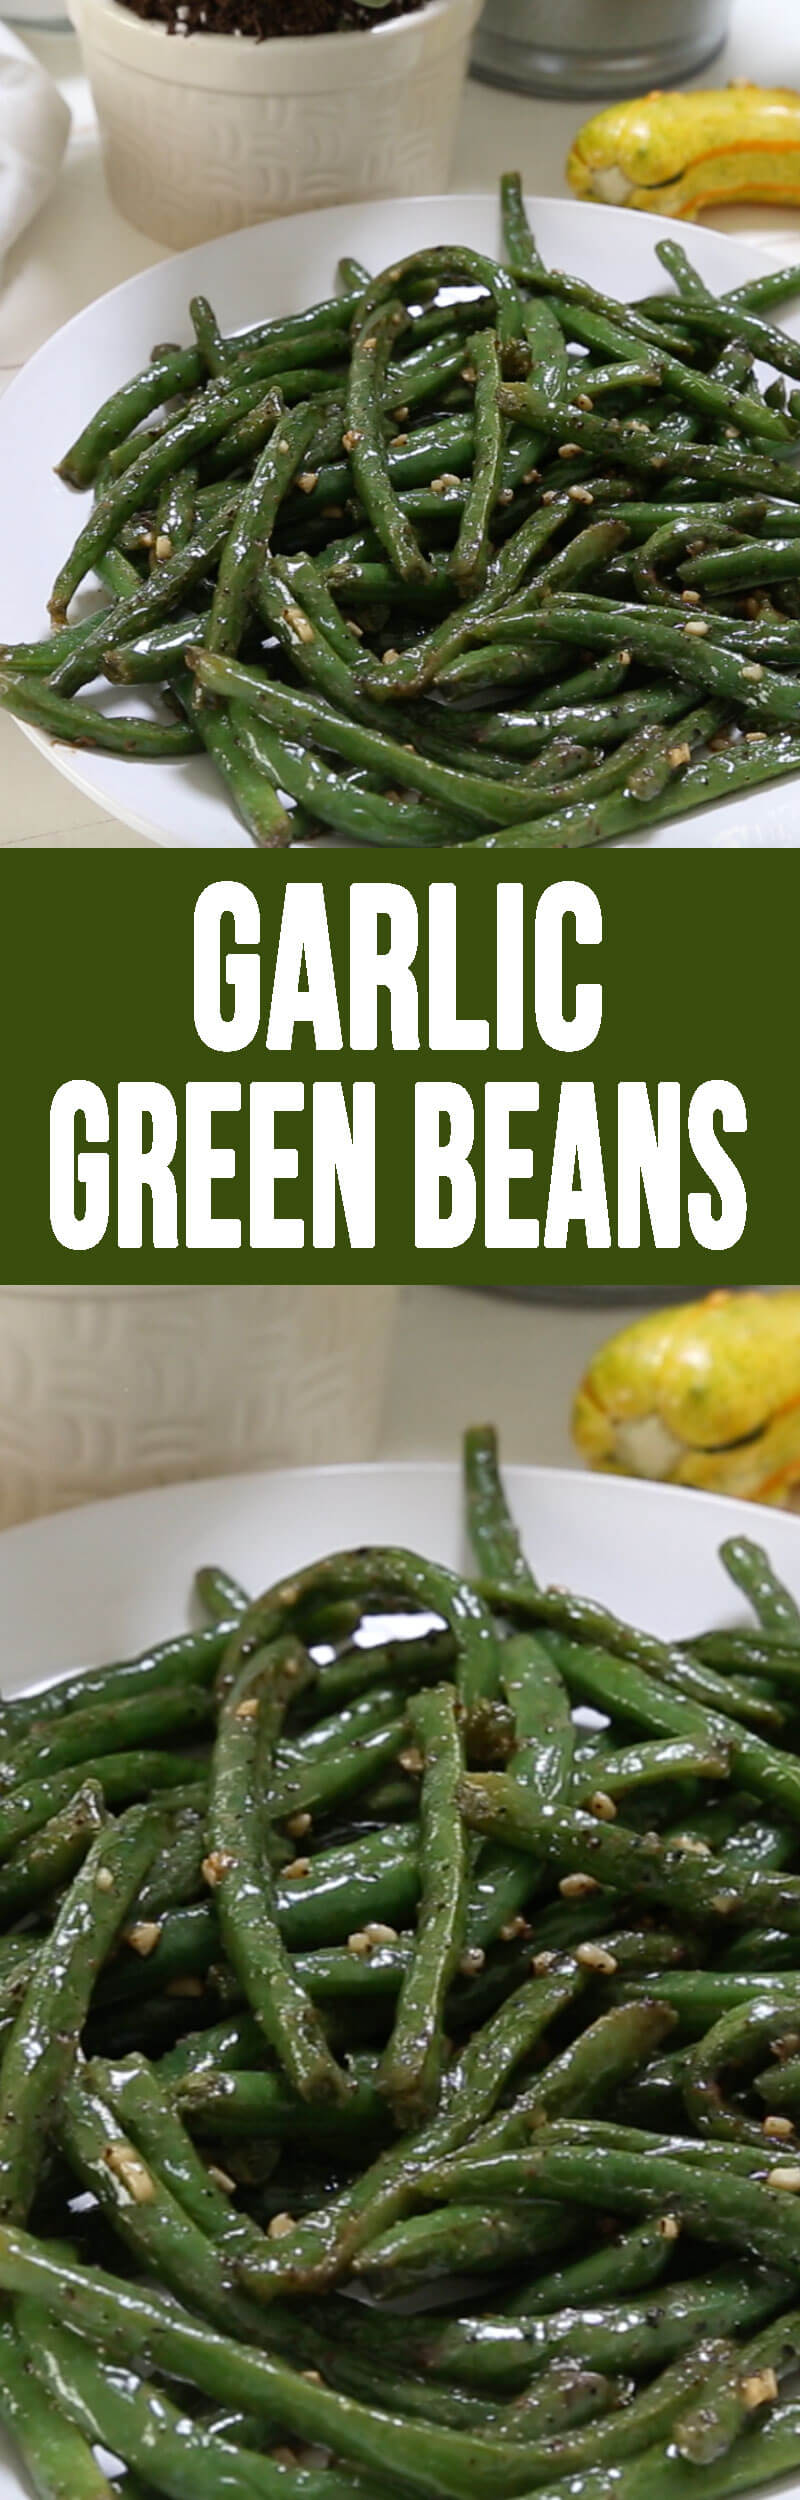 Garlic Green Beans are a simple, easy to make side that is delicious